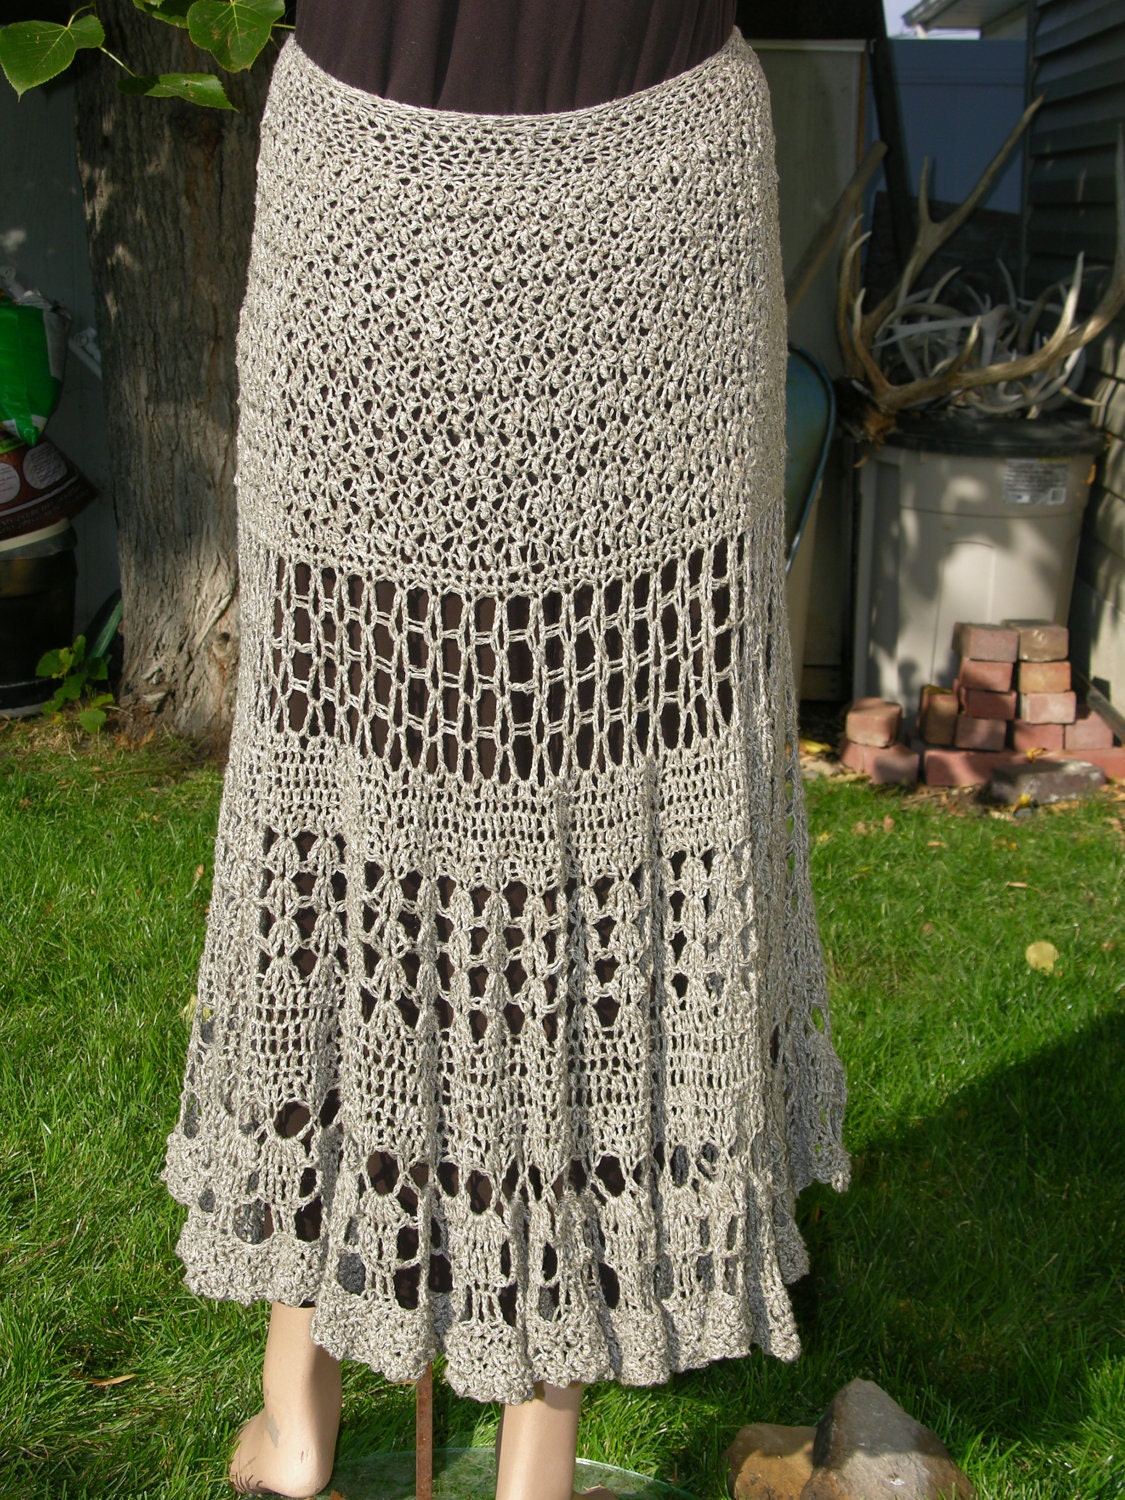 Crochet Beach Skirt in the Spider Stitch with Sizes from Petite to